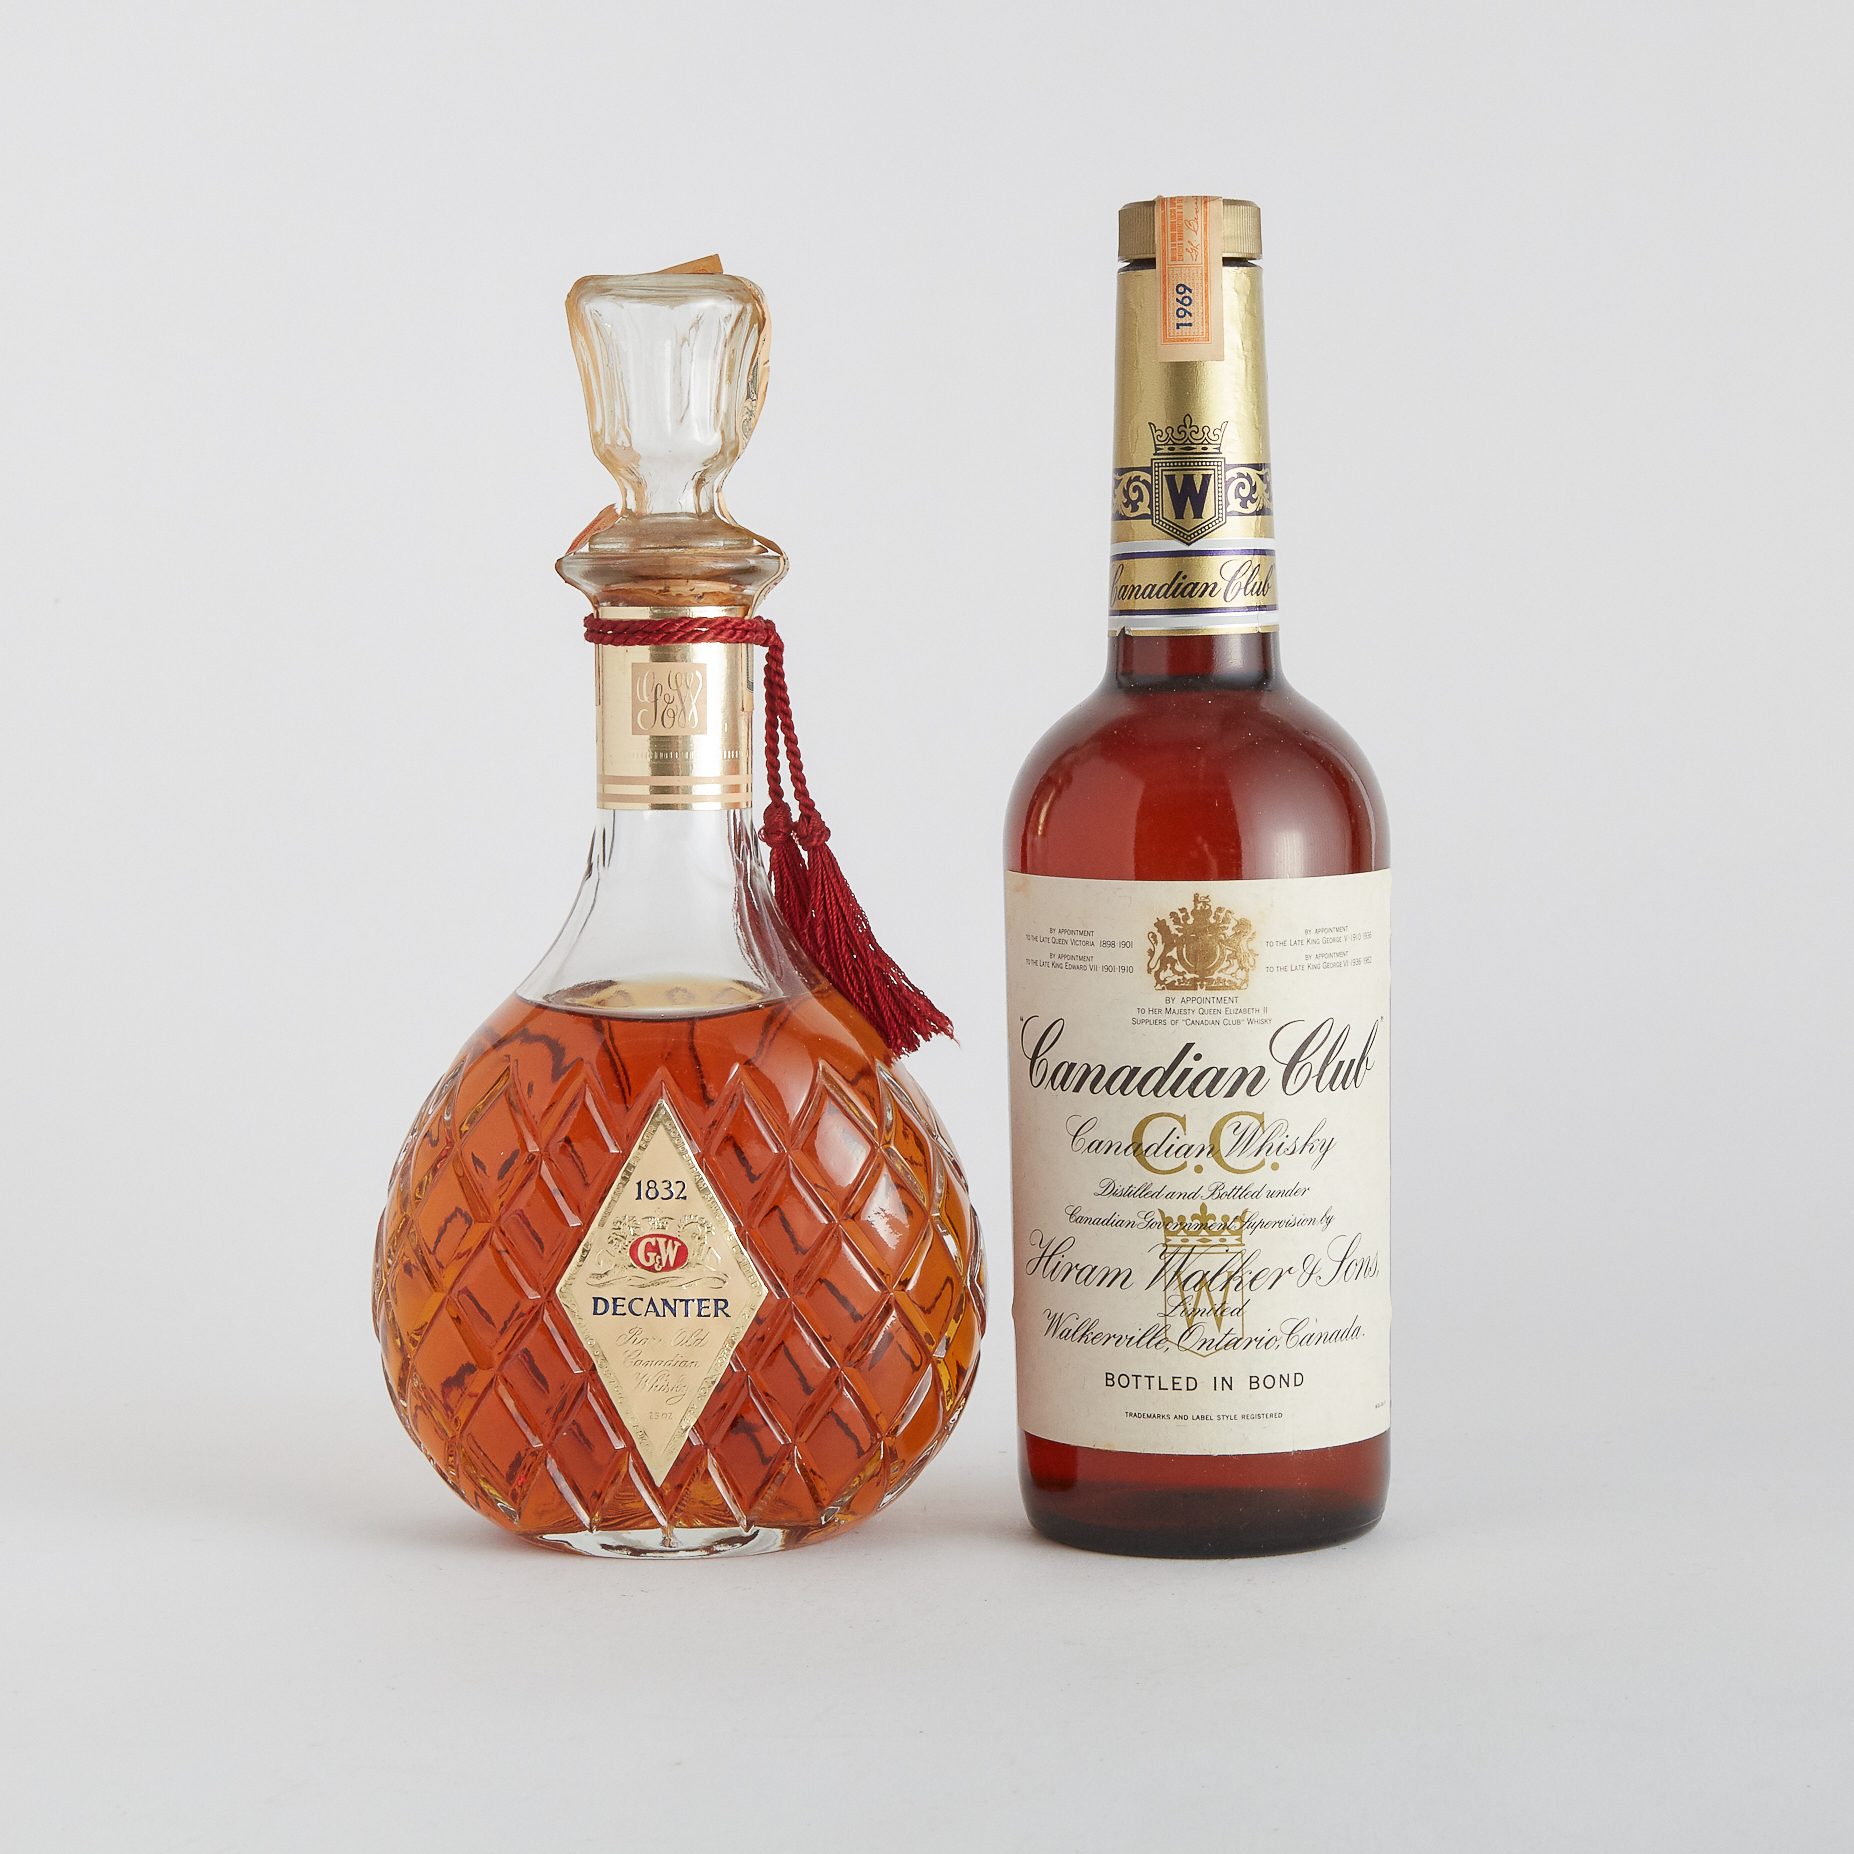 CANADIAN CLUB CANADIAN WHISKY (ONE 750 ML)
GOODERHAM & WORTS RARE OLD CANADIAN WHISKY (ONE 25 OZ)